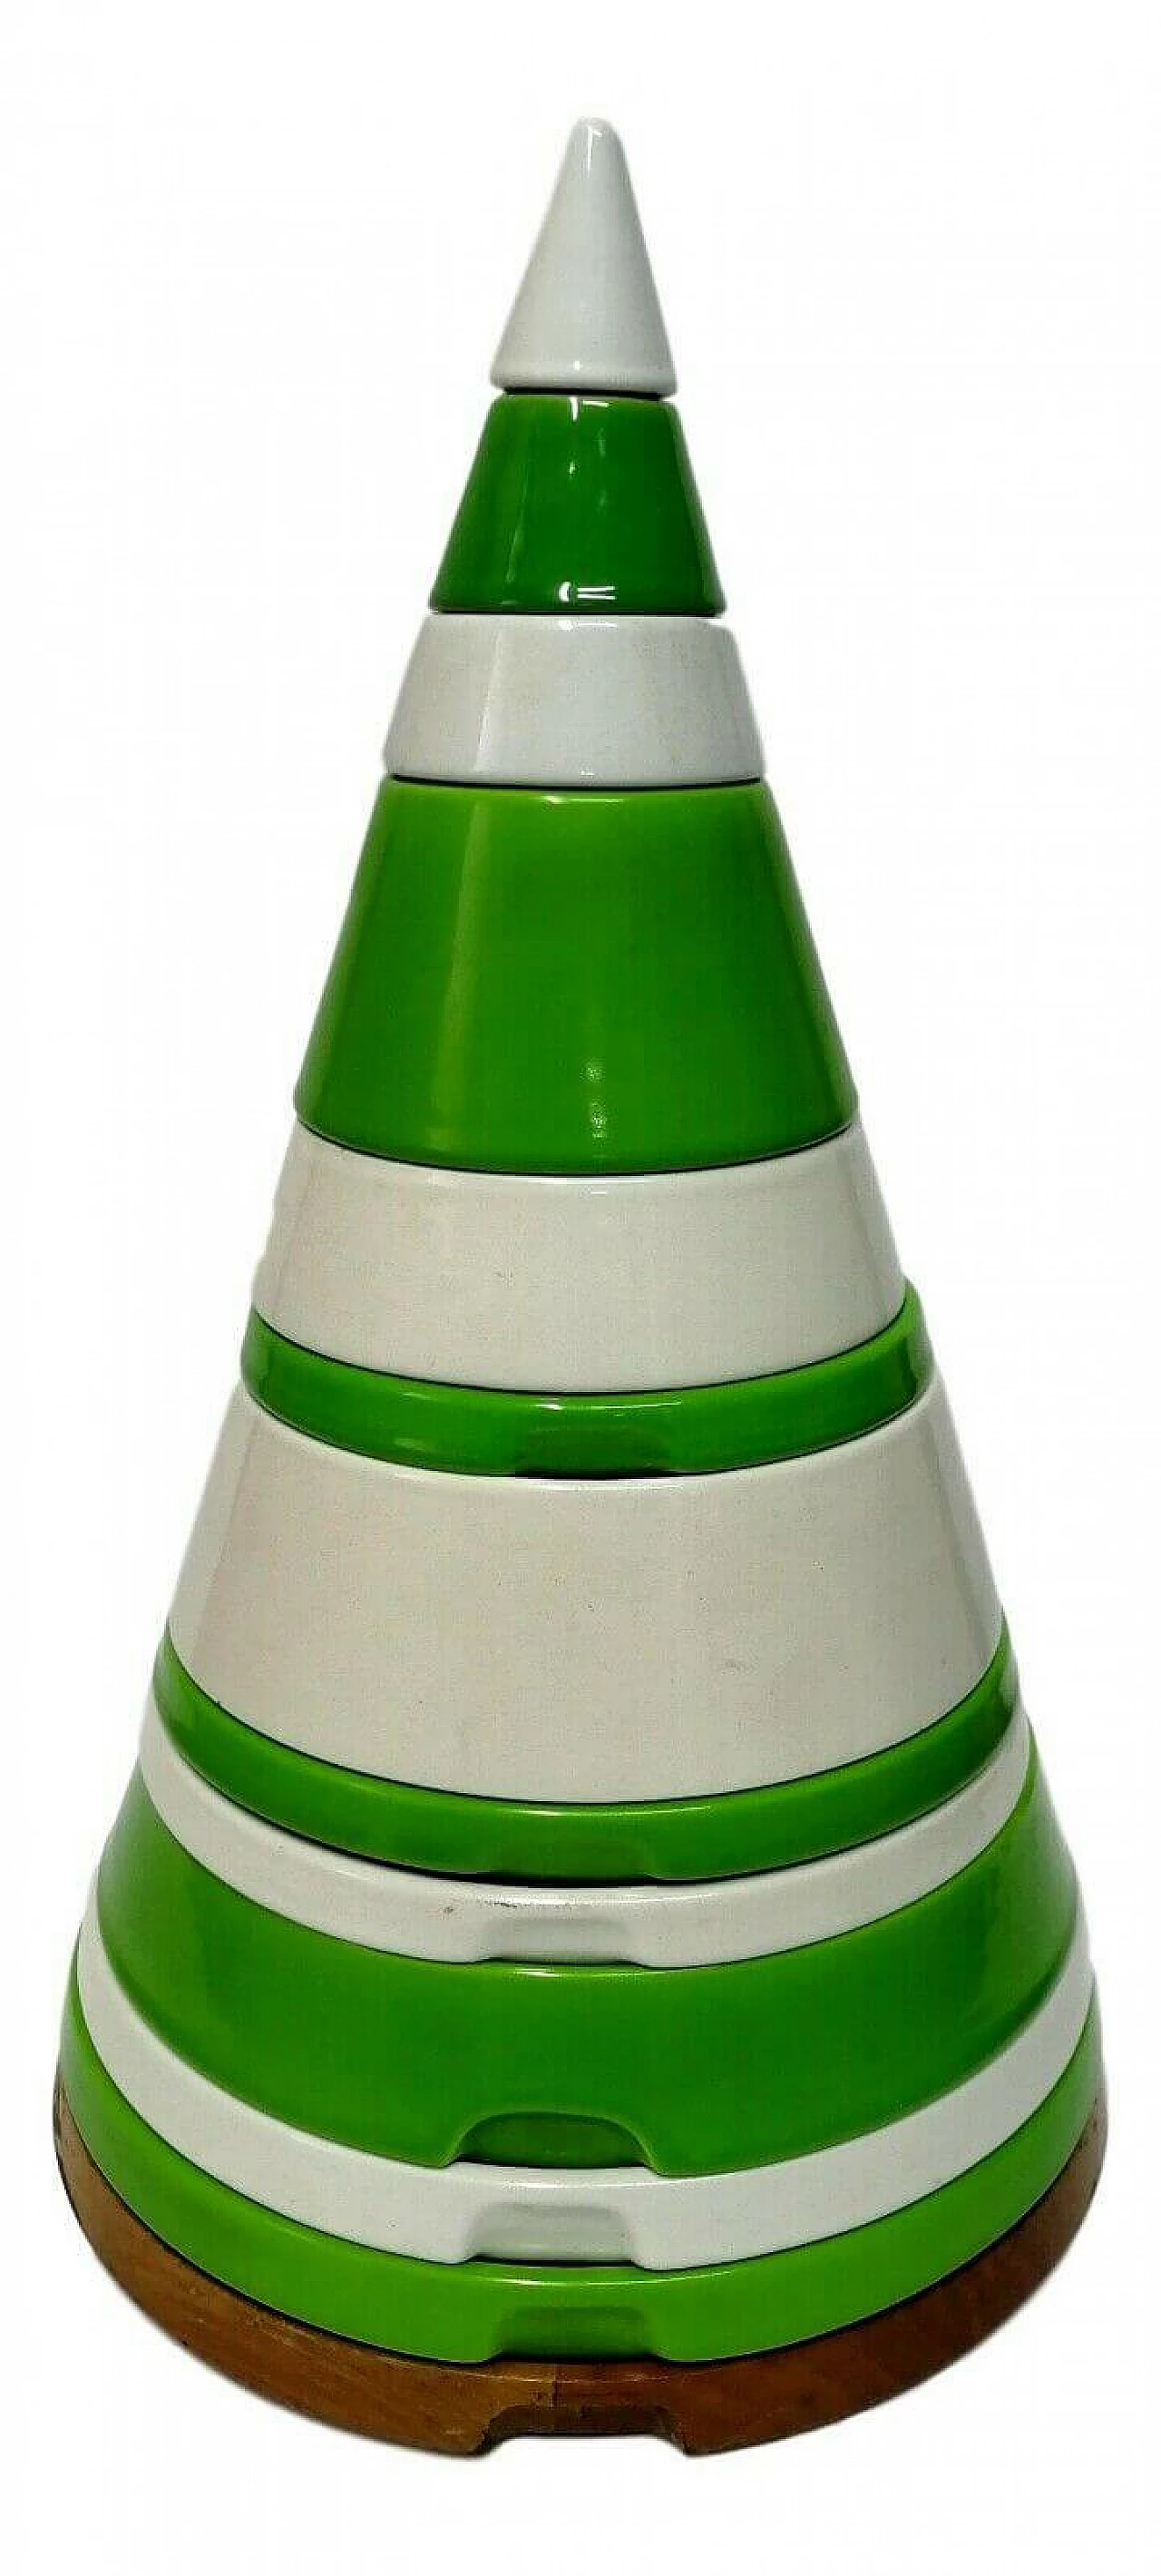 Ceramic tableware Cone designed by Ettore Sottsass for Pierre Cardin, produced by Franco Pozzi, 1969 1168079